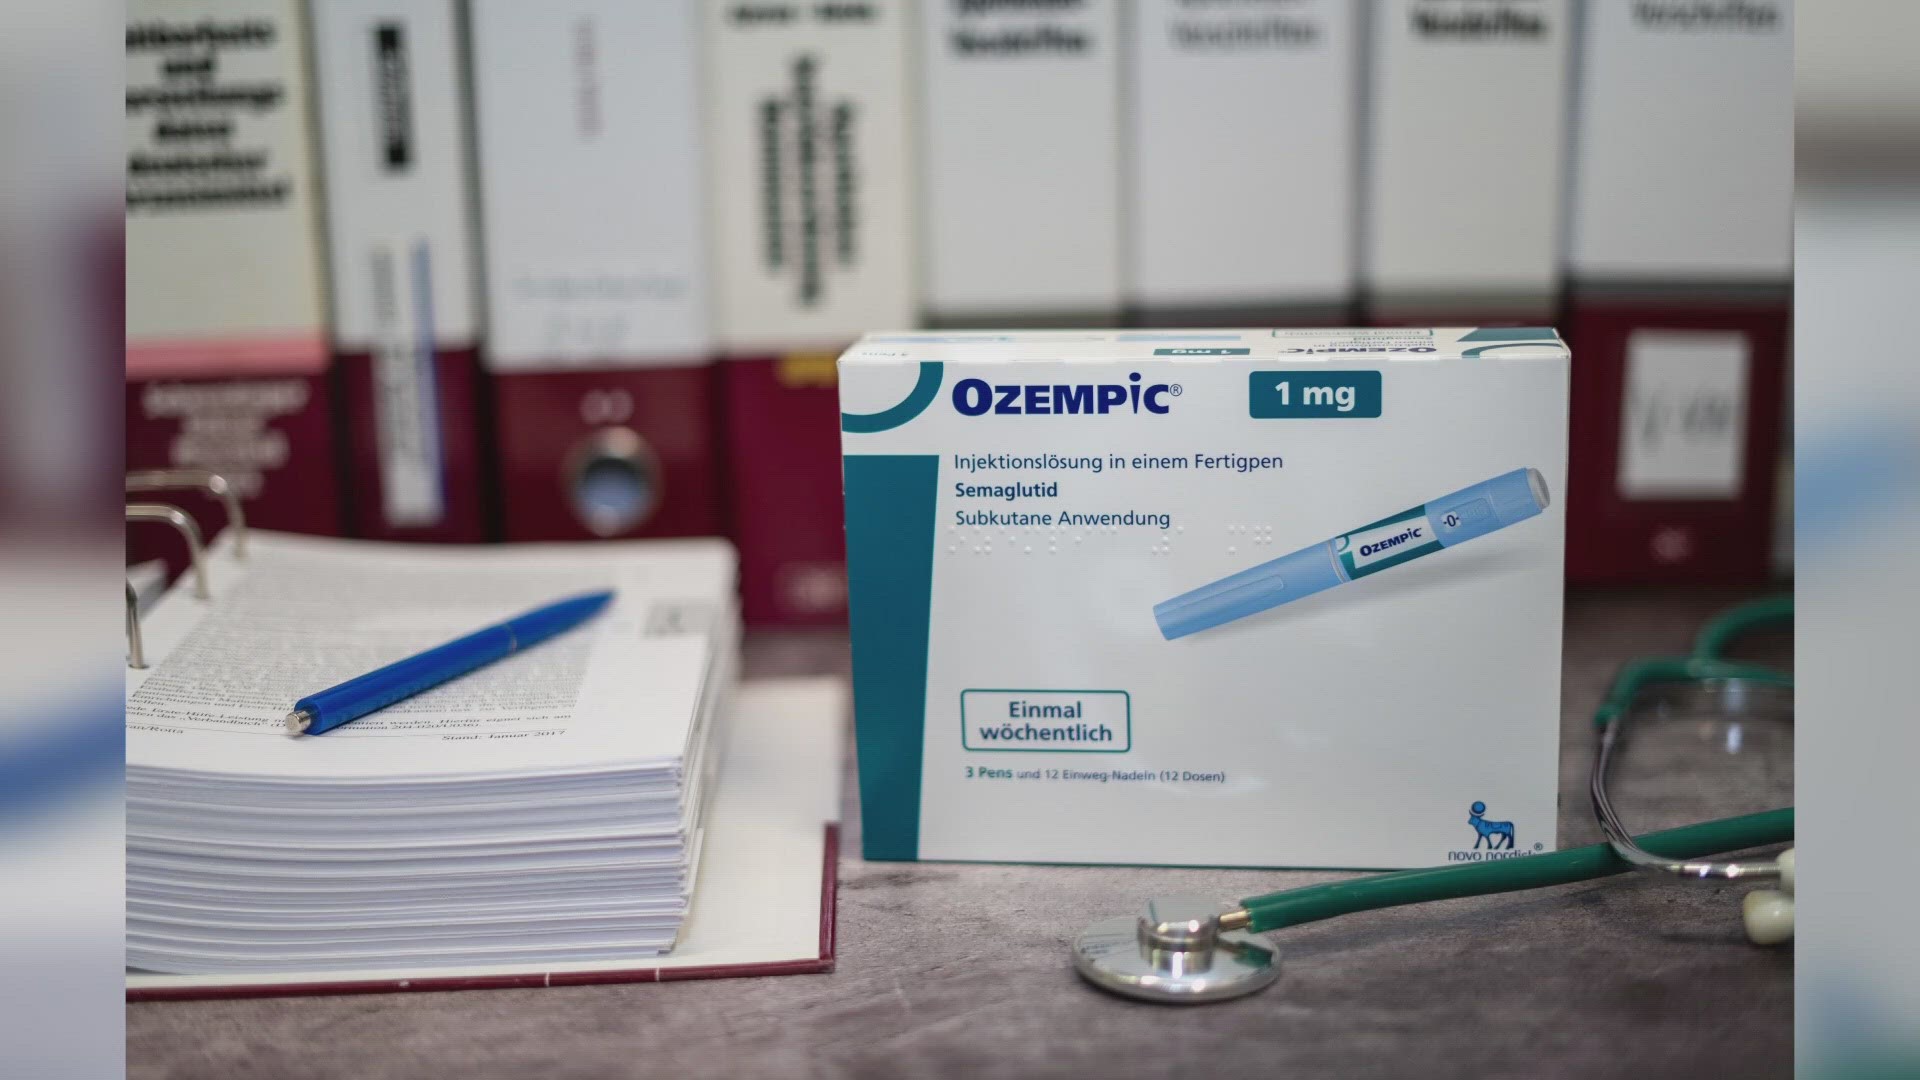 As promising as Ozempic and its generic counterpart may be, experts emphasize the need for a holistic lifestyle shift to sustain weight loss results.